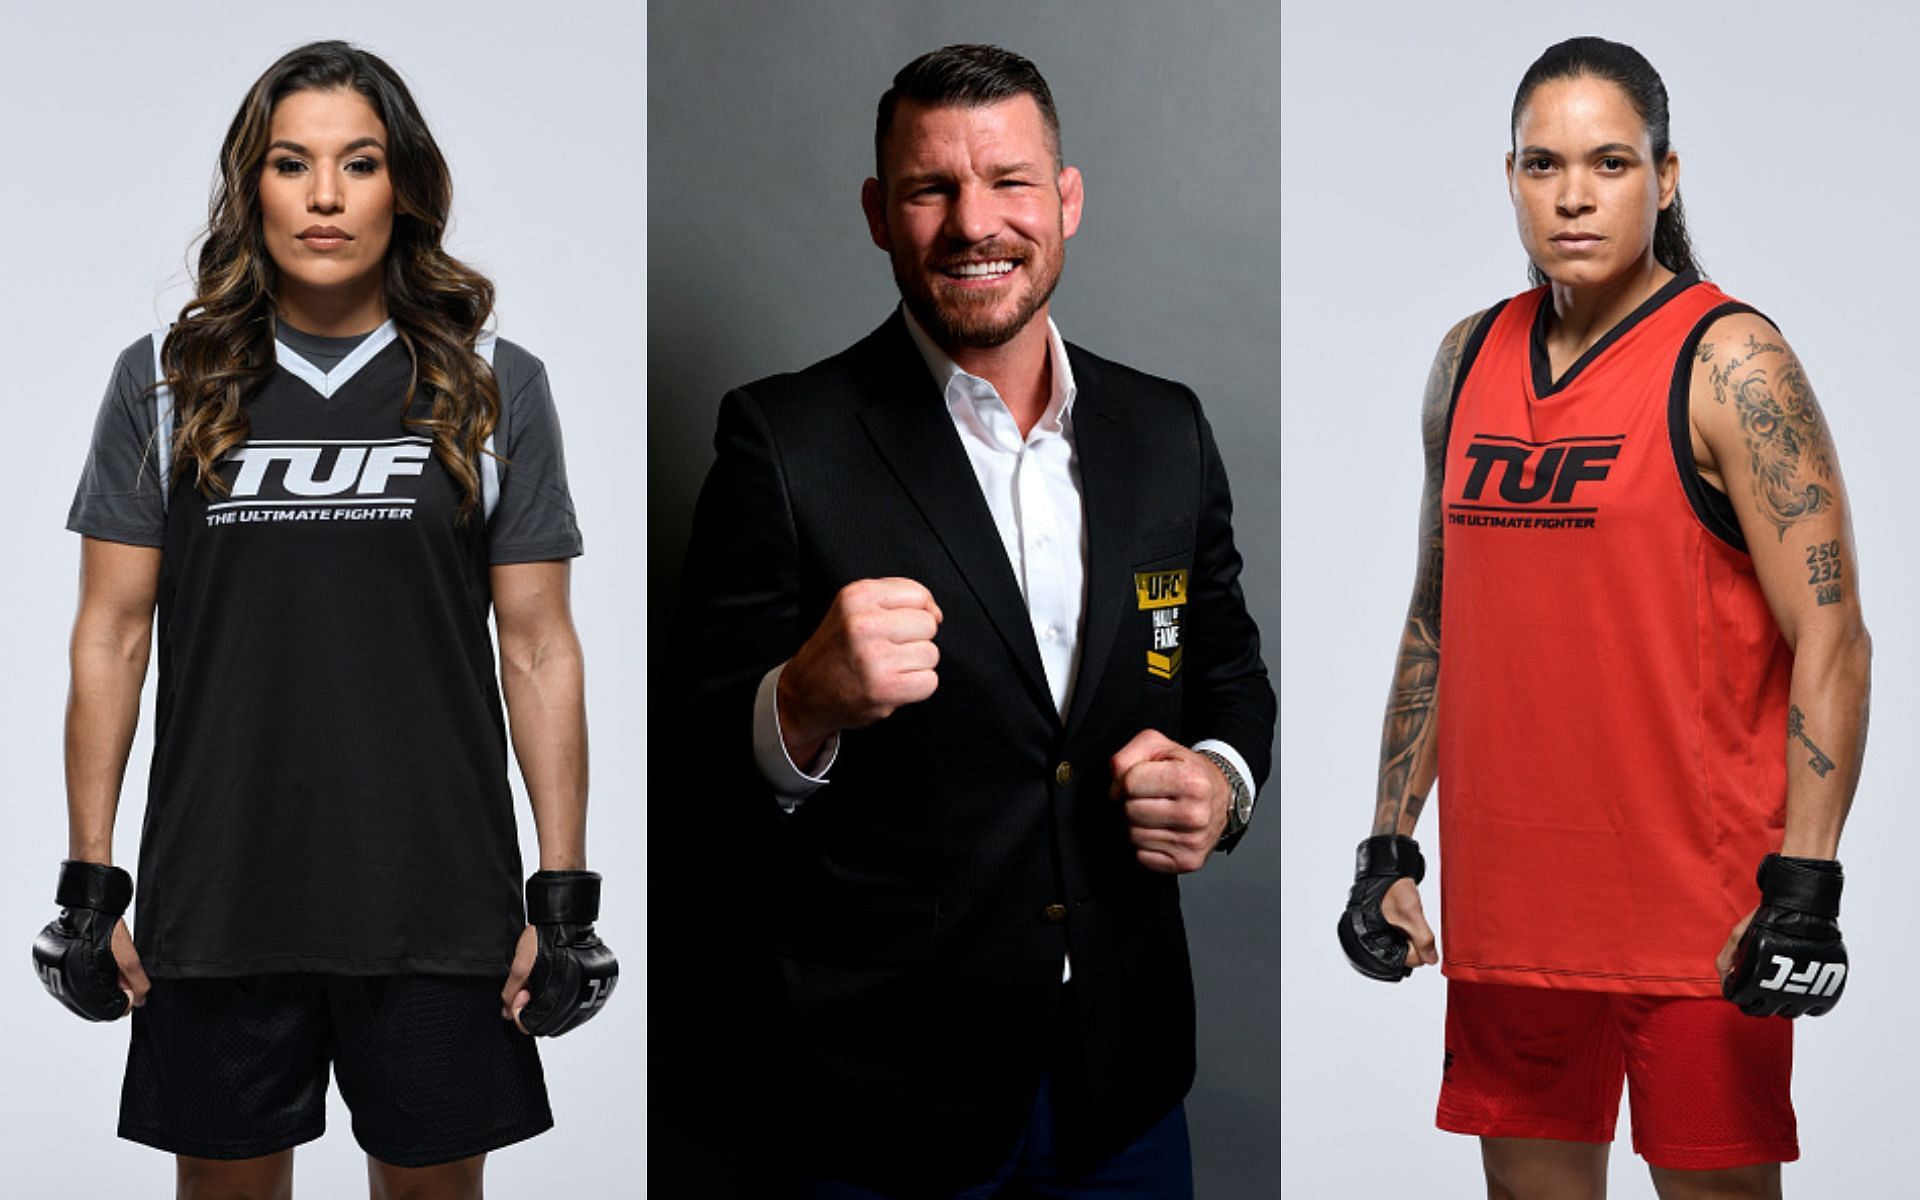 Julianna Pena (left), Michael Bisping (middle), and Amanda Nunes (right)(Images via Getty)